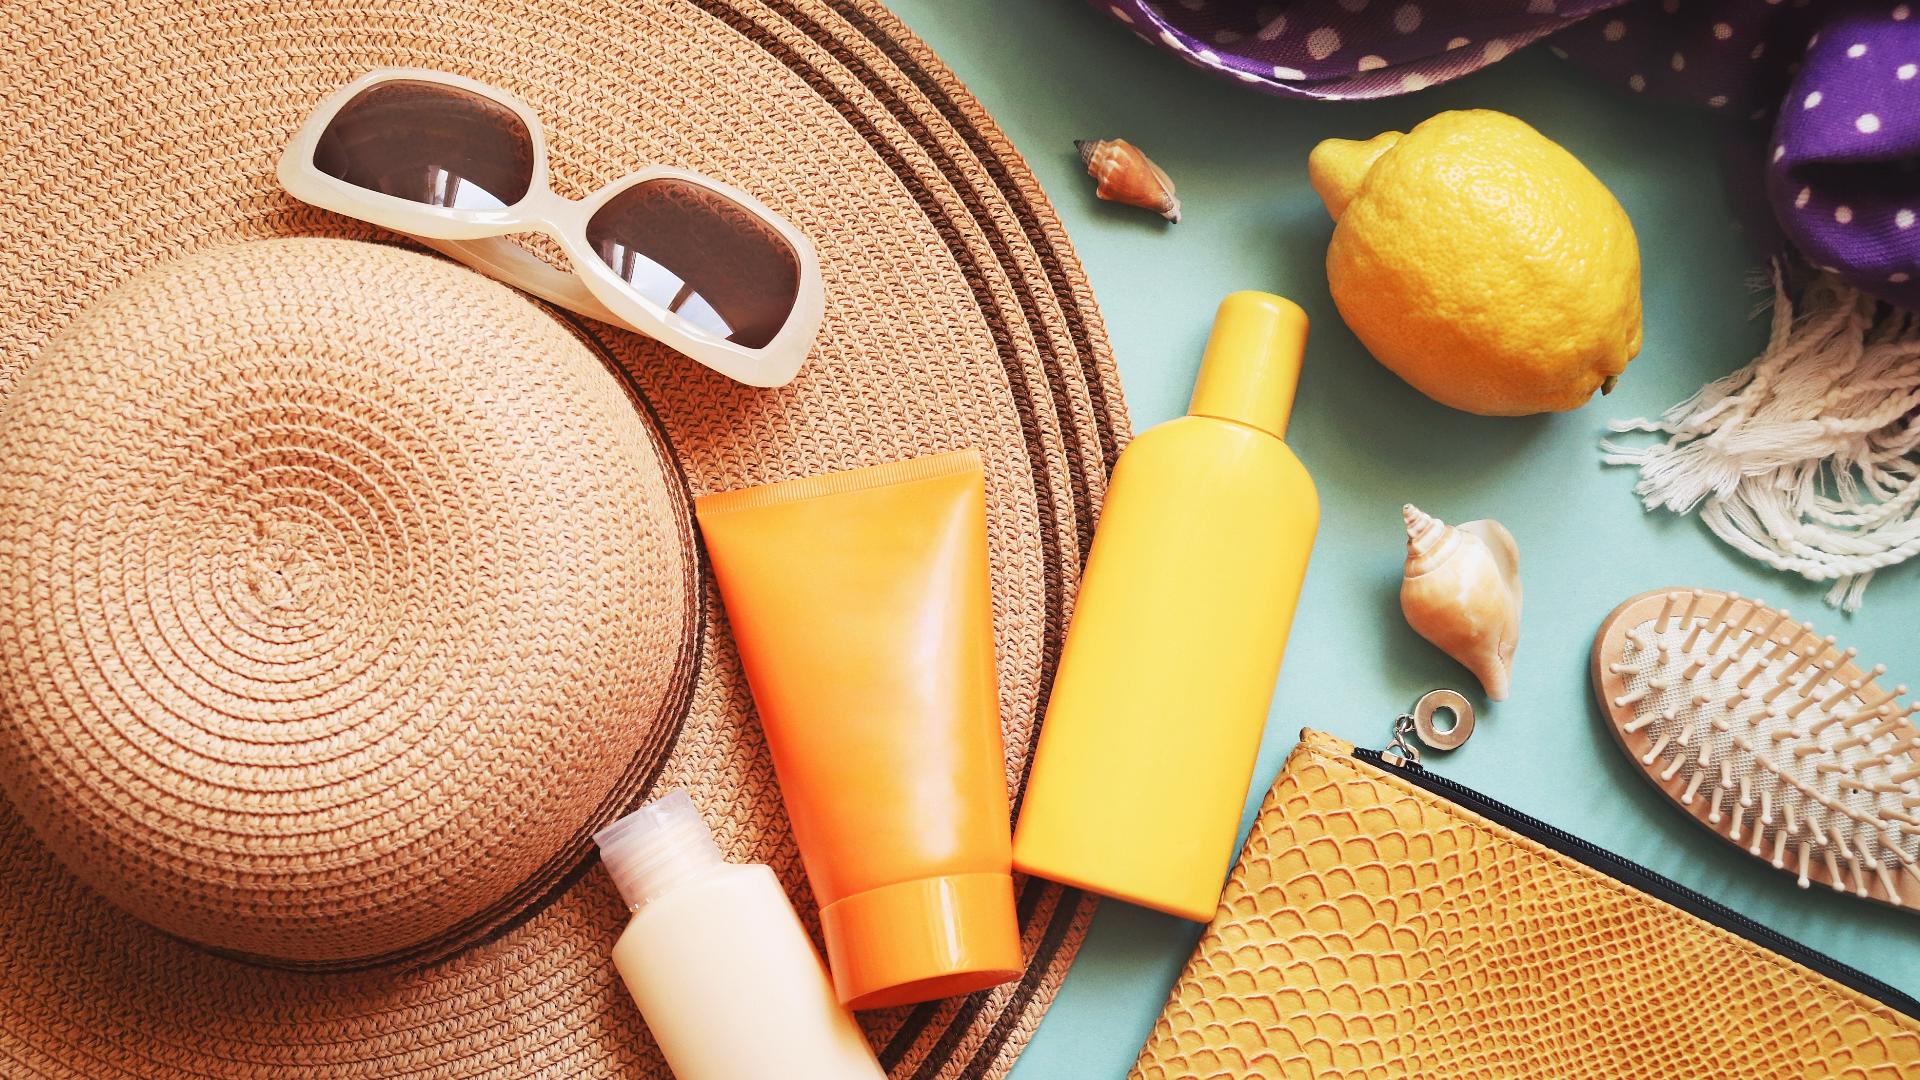 Sponsored by: Limor Media. Lifestyle contributor, Limor Suss shares her Summer essentials to grab this weekend from the entire season.